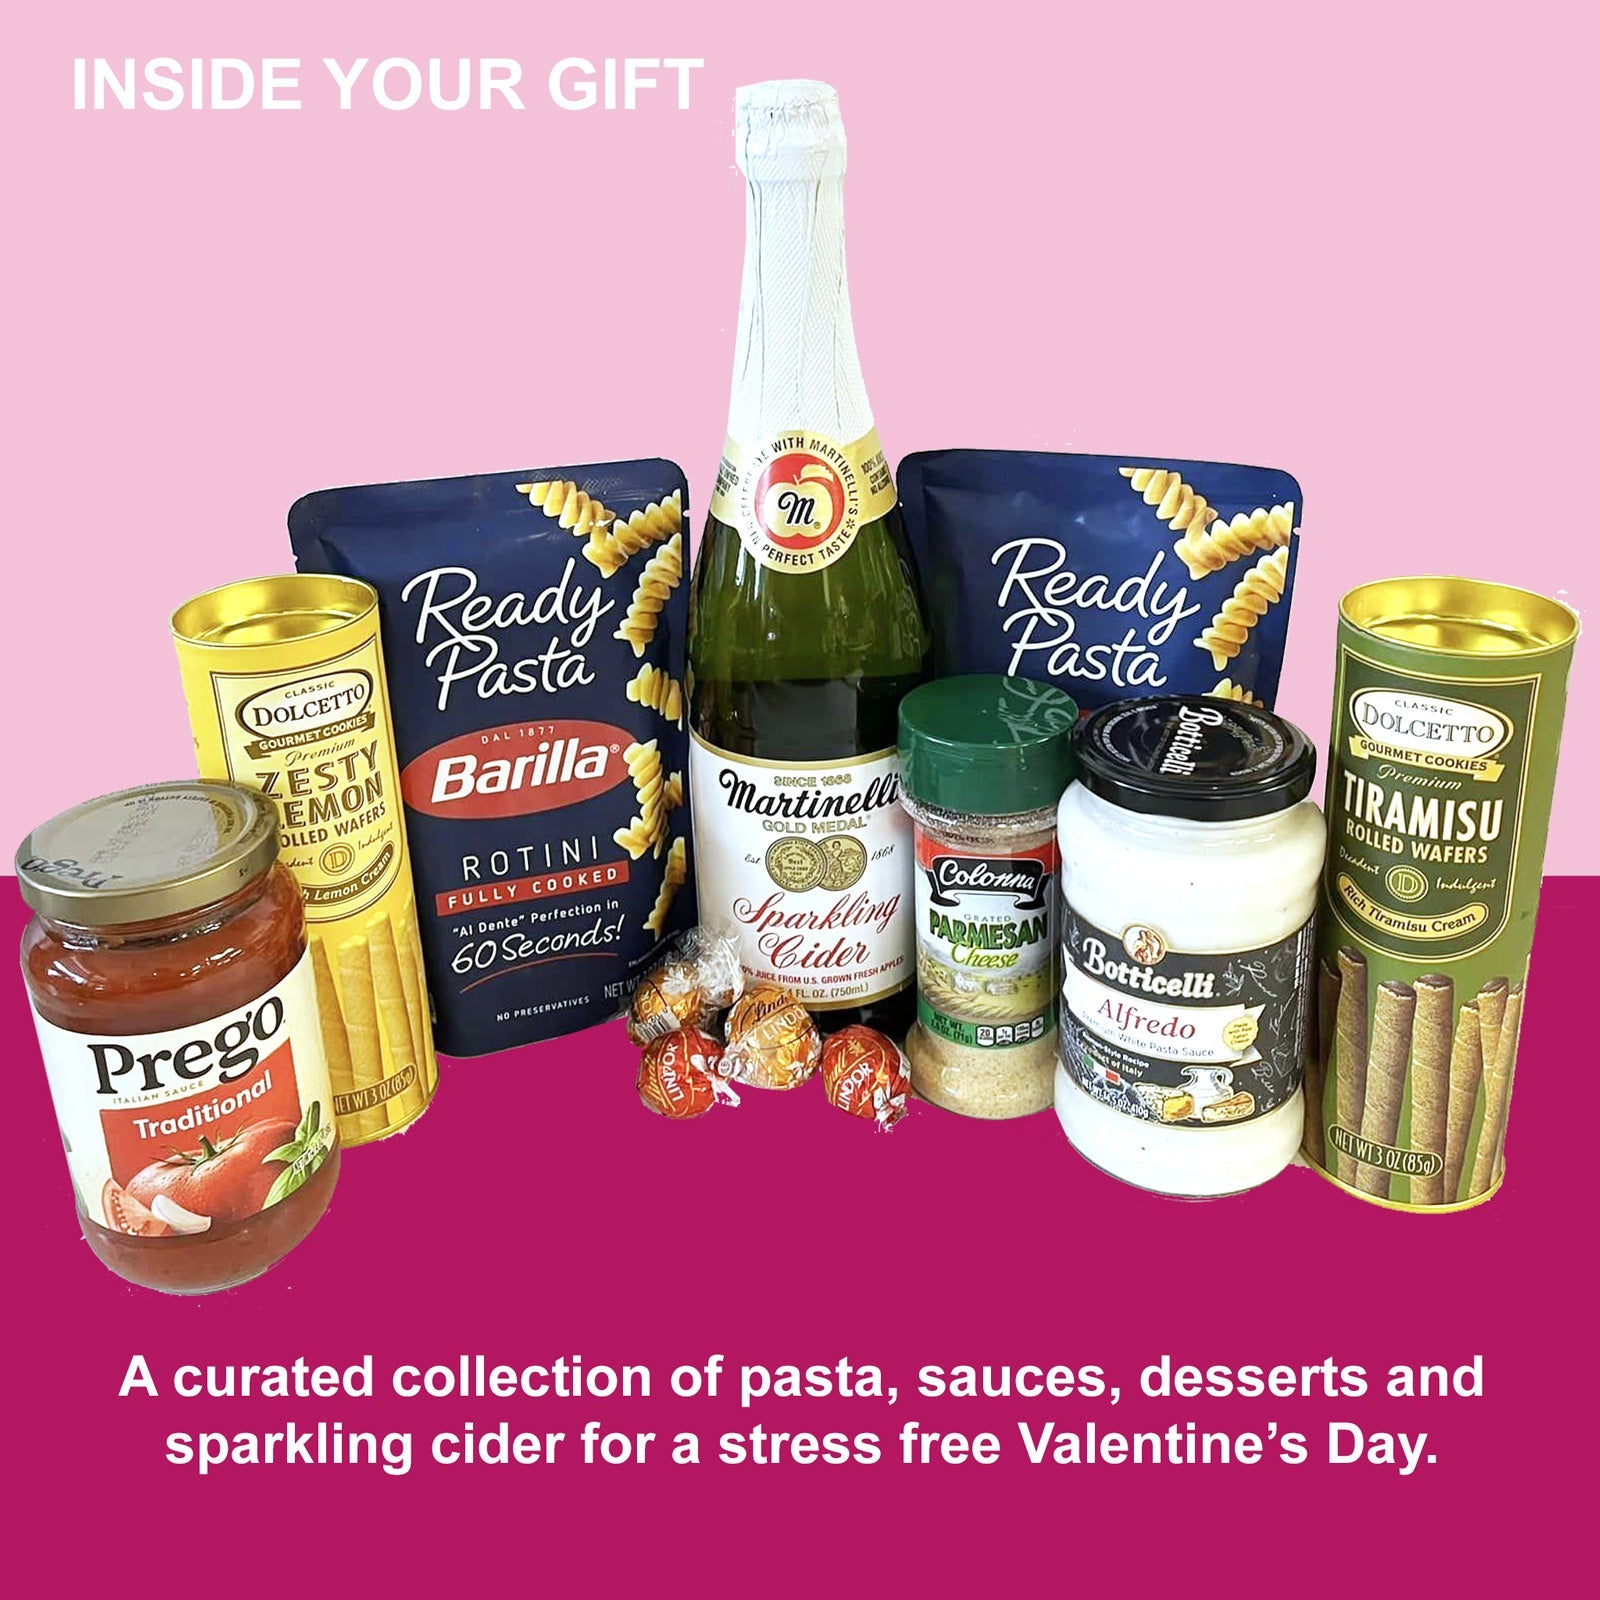 Dinner for Two Valentine's Day Gift Basket with Pasta, Sauces, Dessert